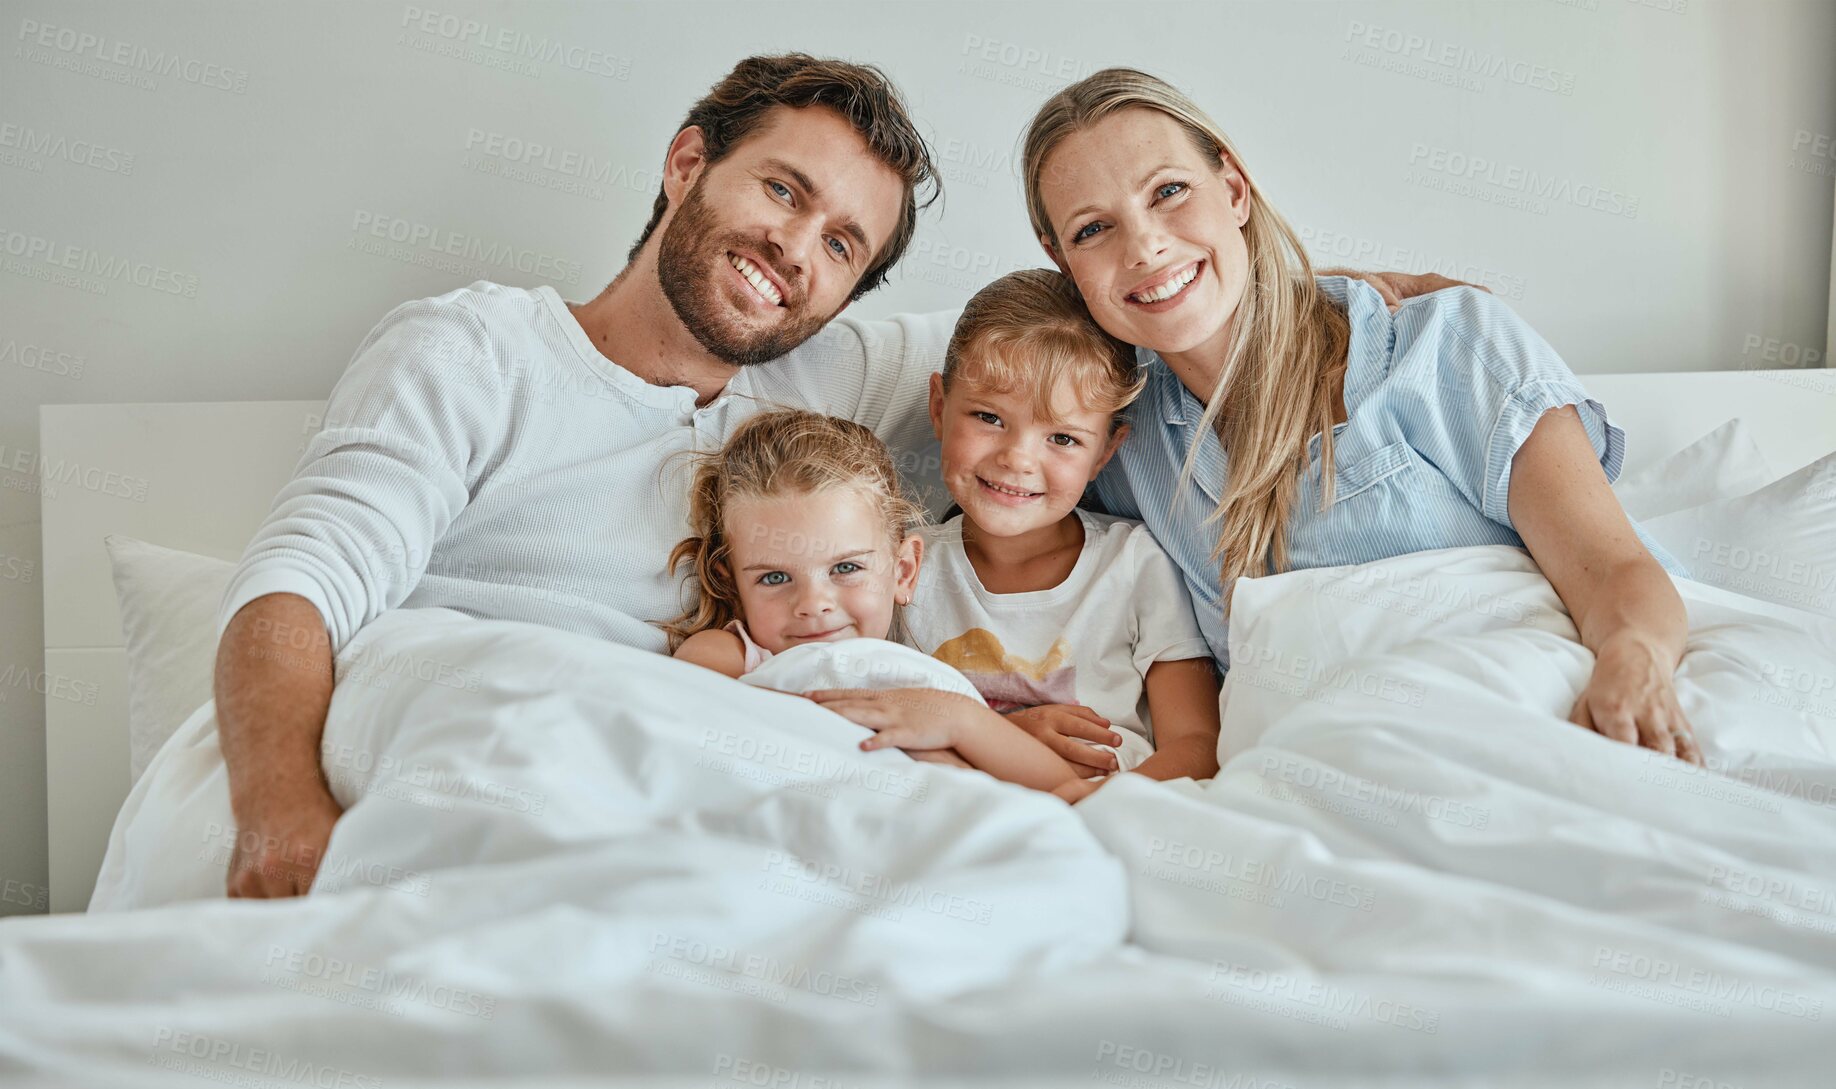 Buy stock photo Family, children and bed with a girl, sister and parents in the bedroom of a home to relax together in the morning. Portrait, love and smile with a happy mother, father and daughter siblings bonding